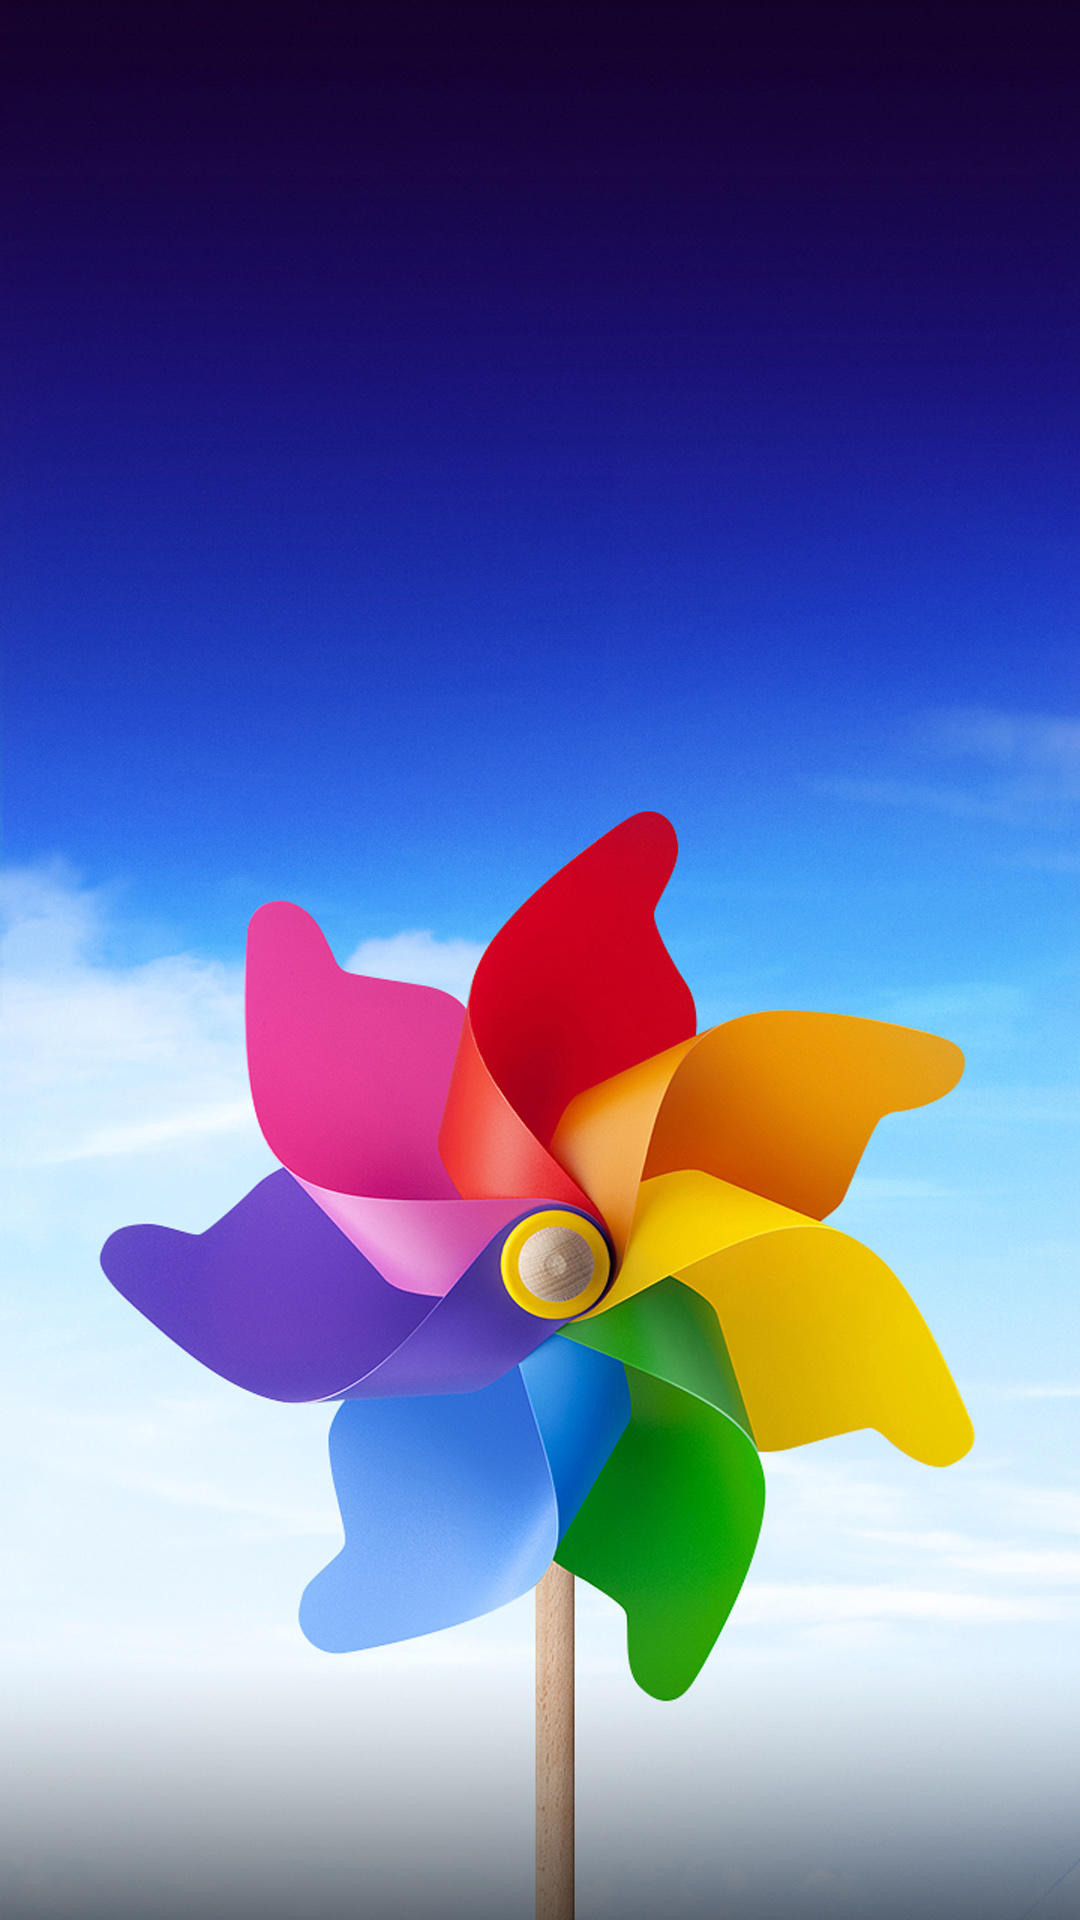 colorful wallpaper for android,wheel,sky,pinwheel,blue,automotive wheel system